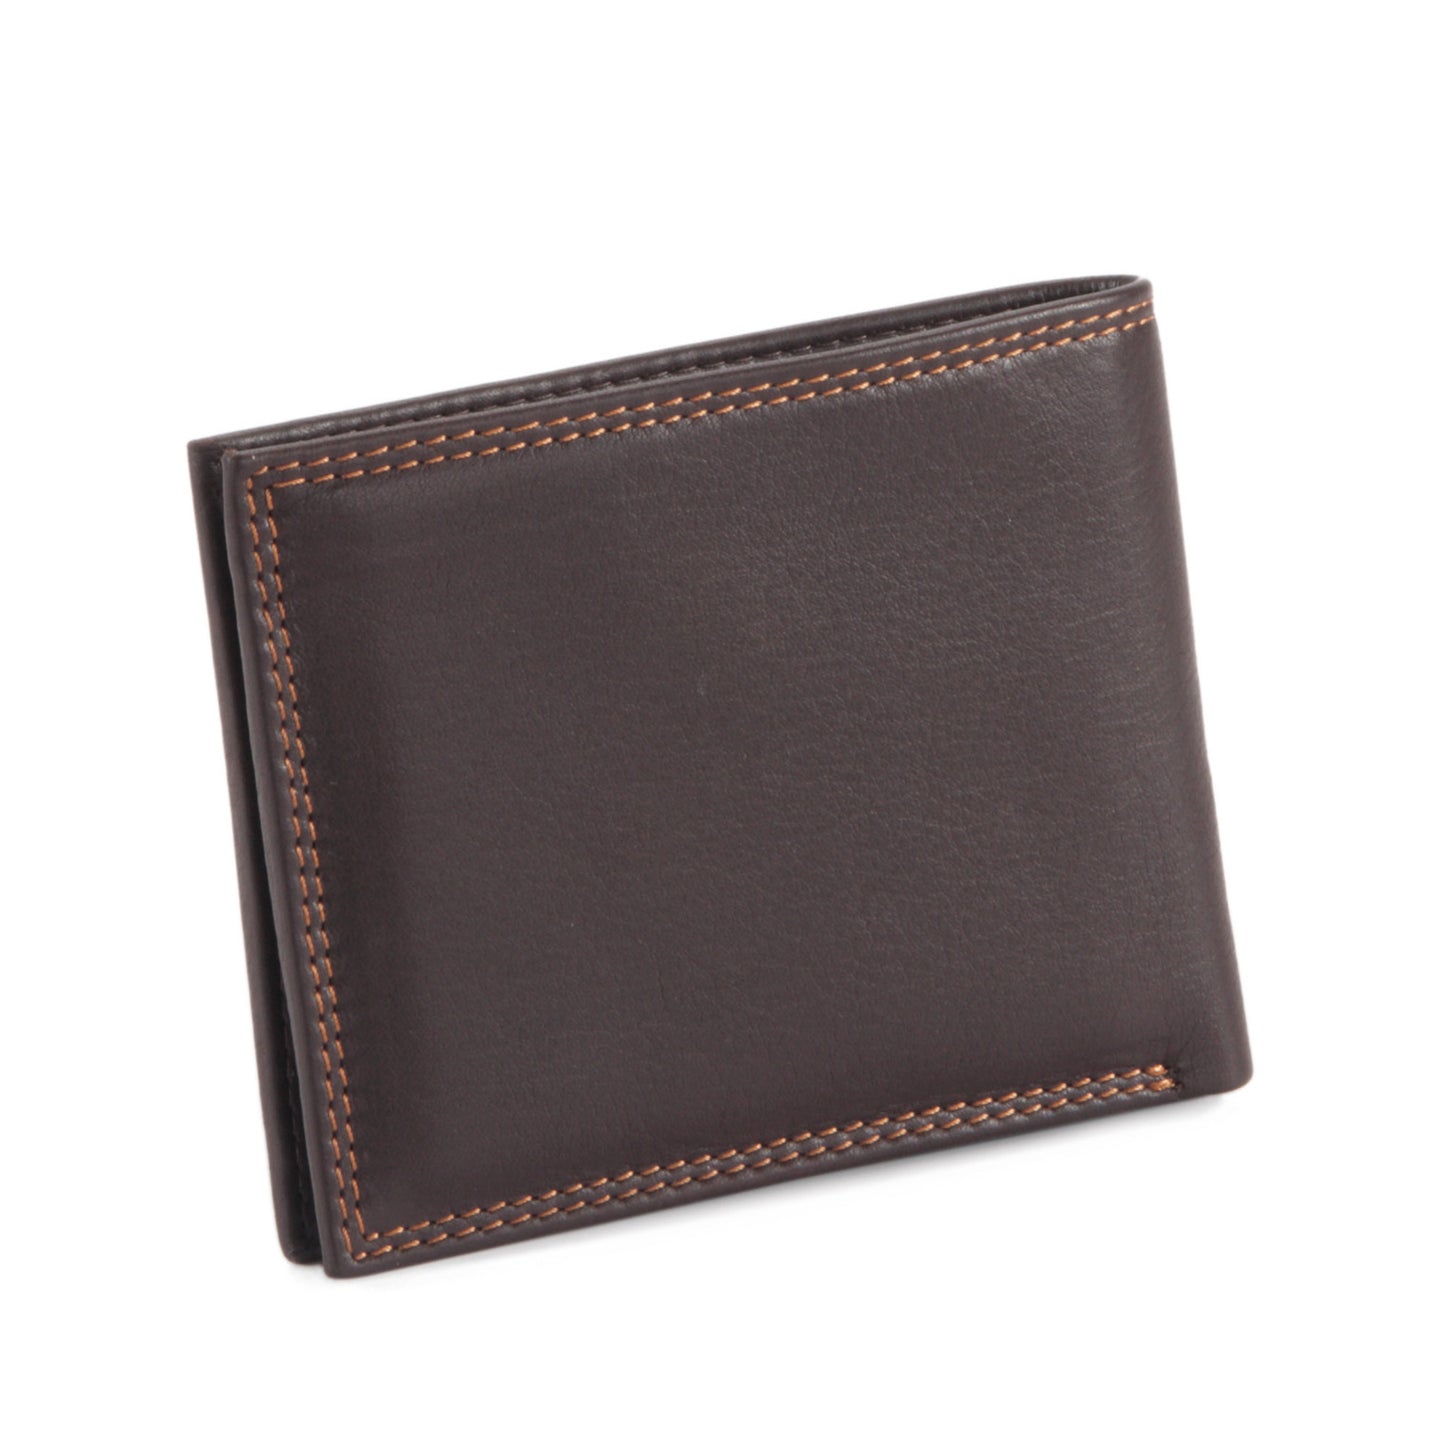 Classic Bifold Leather Wallet (Premium, Full Grain Leather), Chocolate Brown